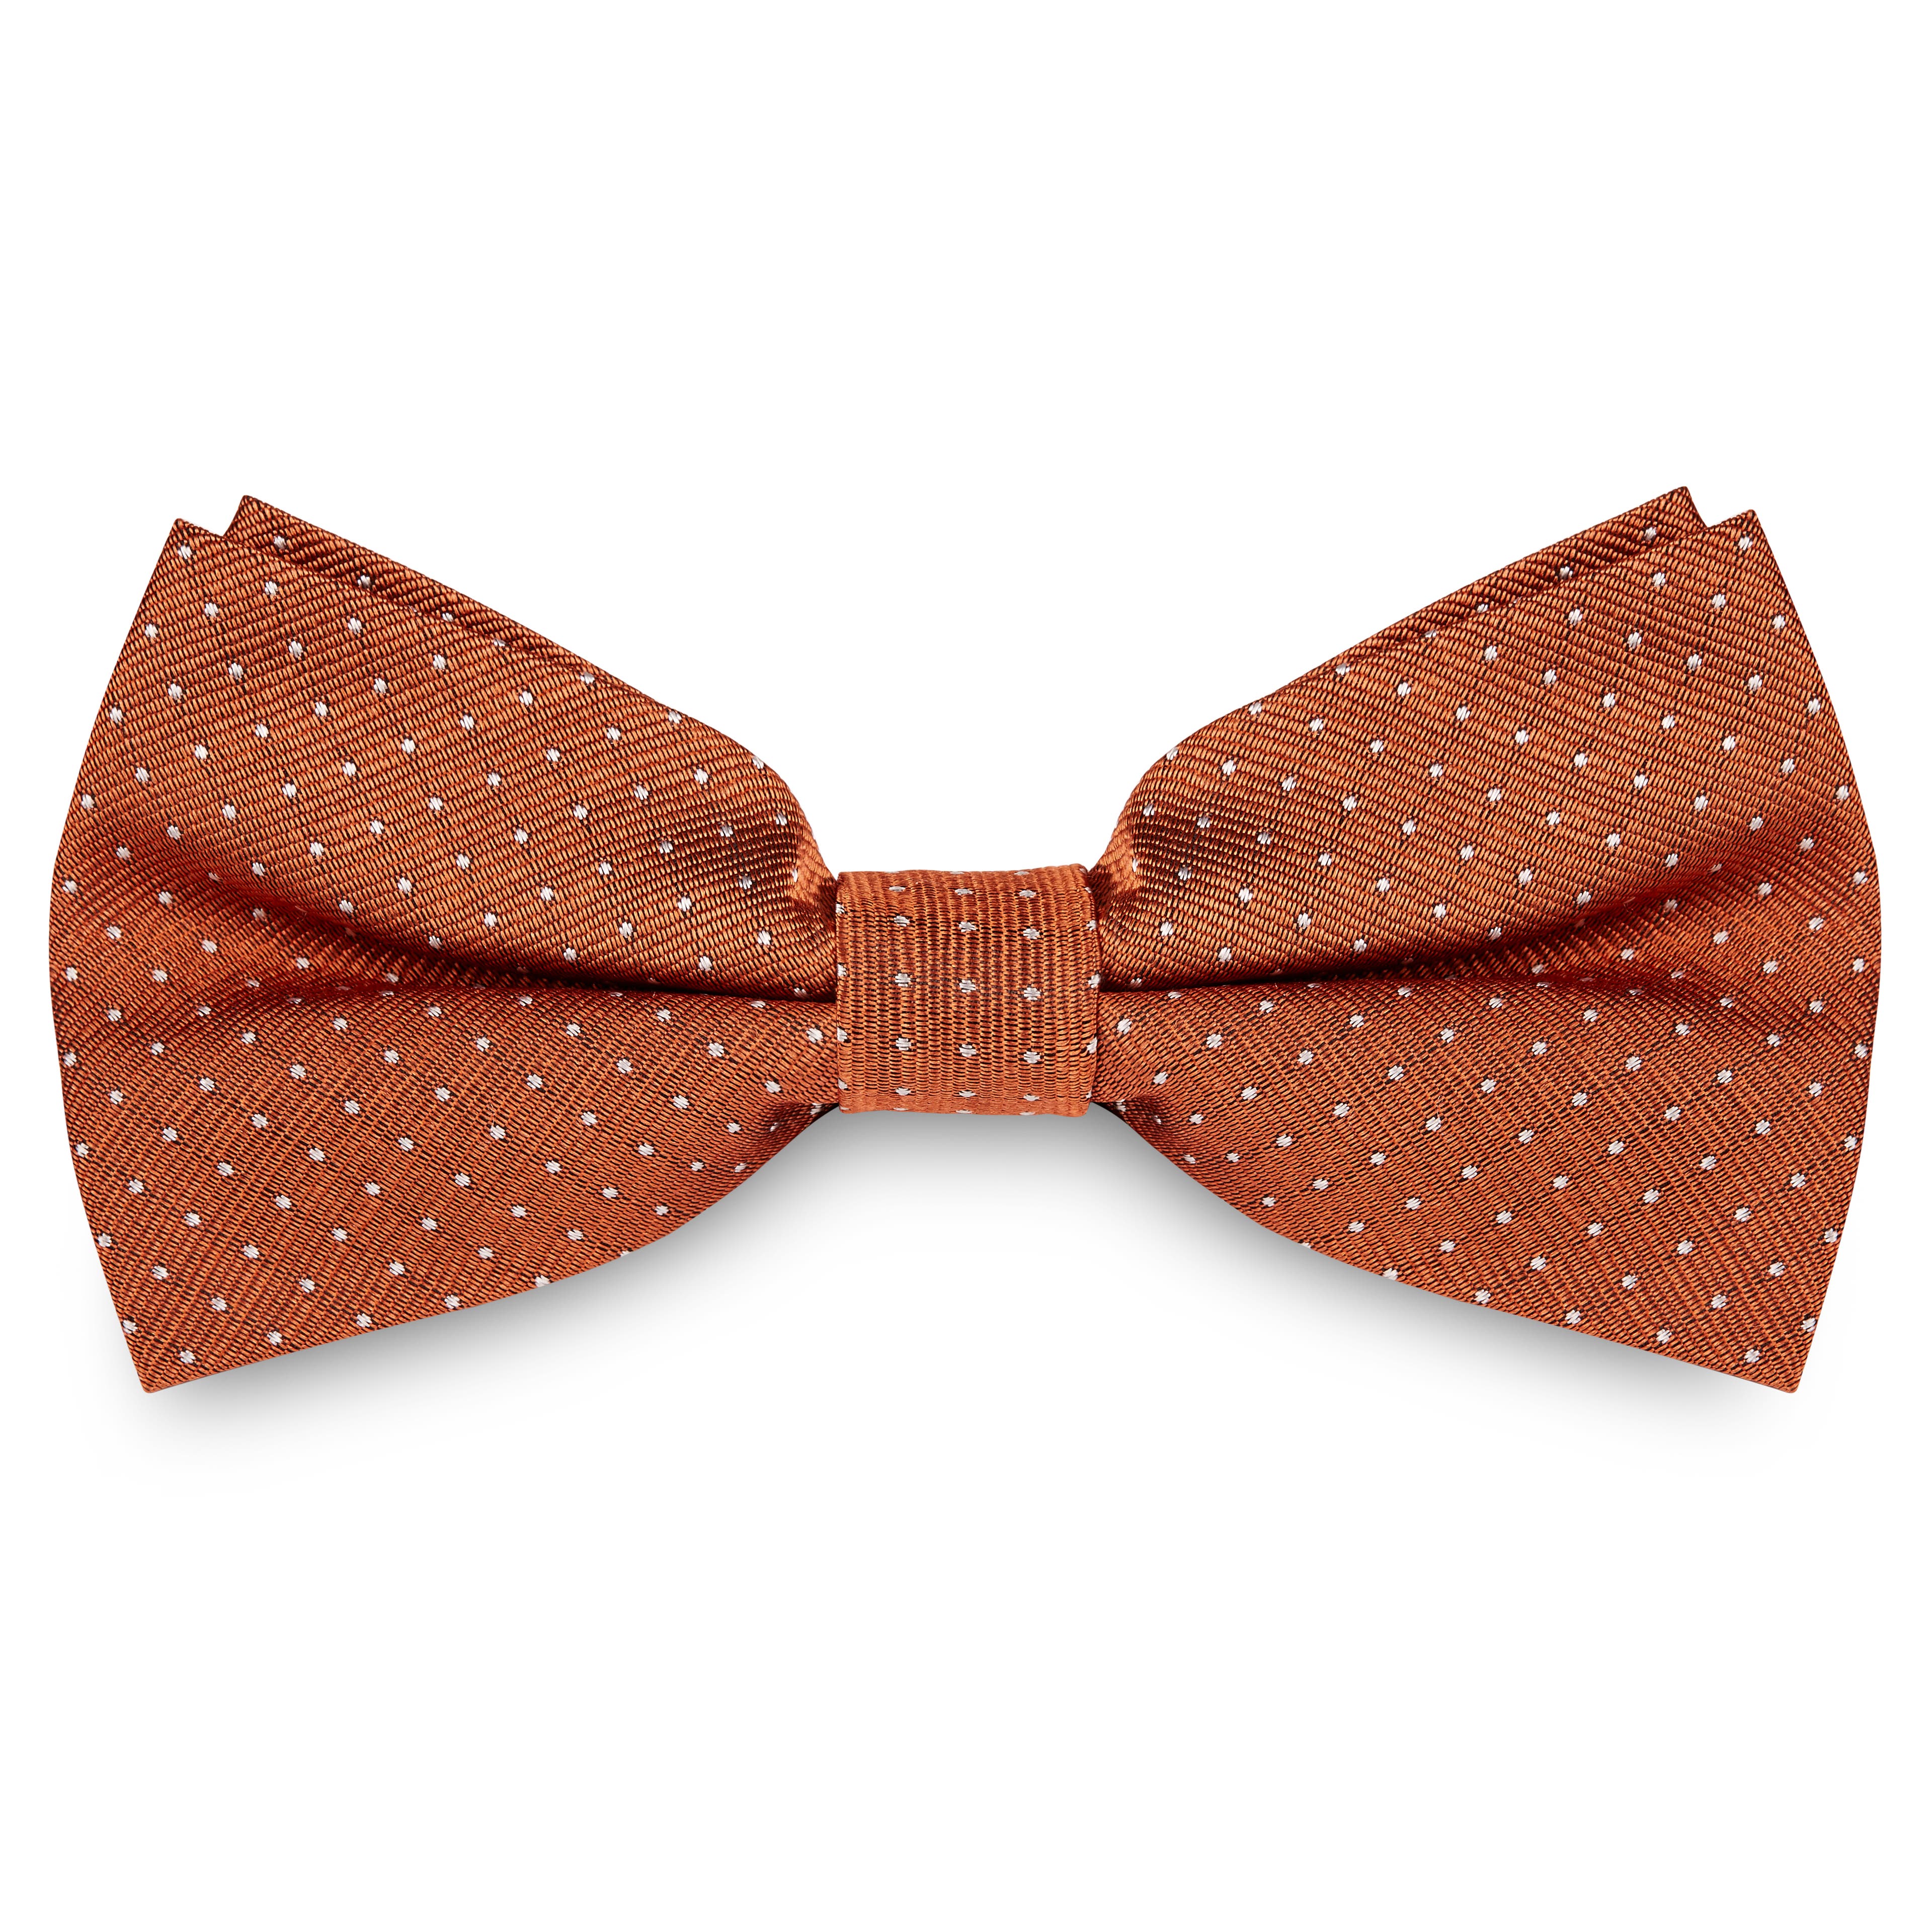 Burnished Brown Polka Dot Silk Pre-Tied Bow Tie